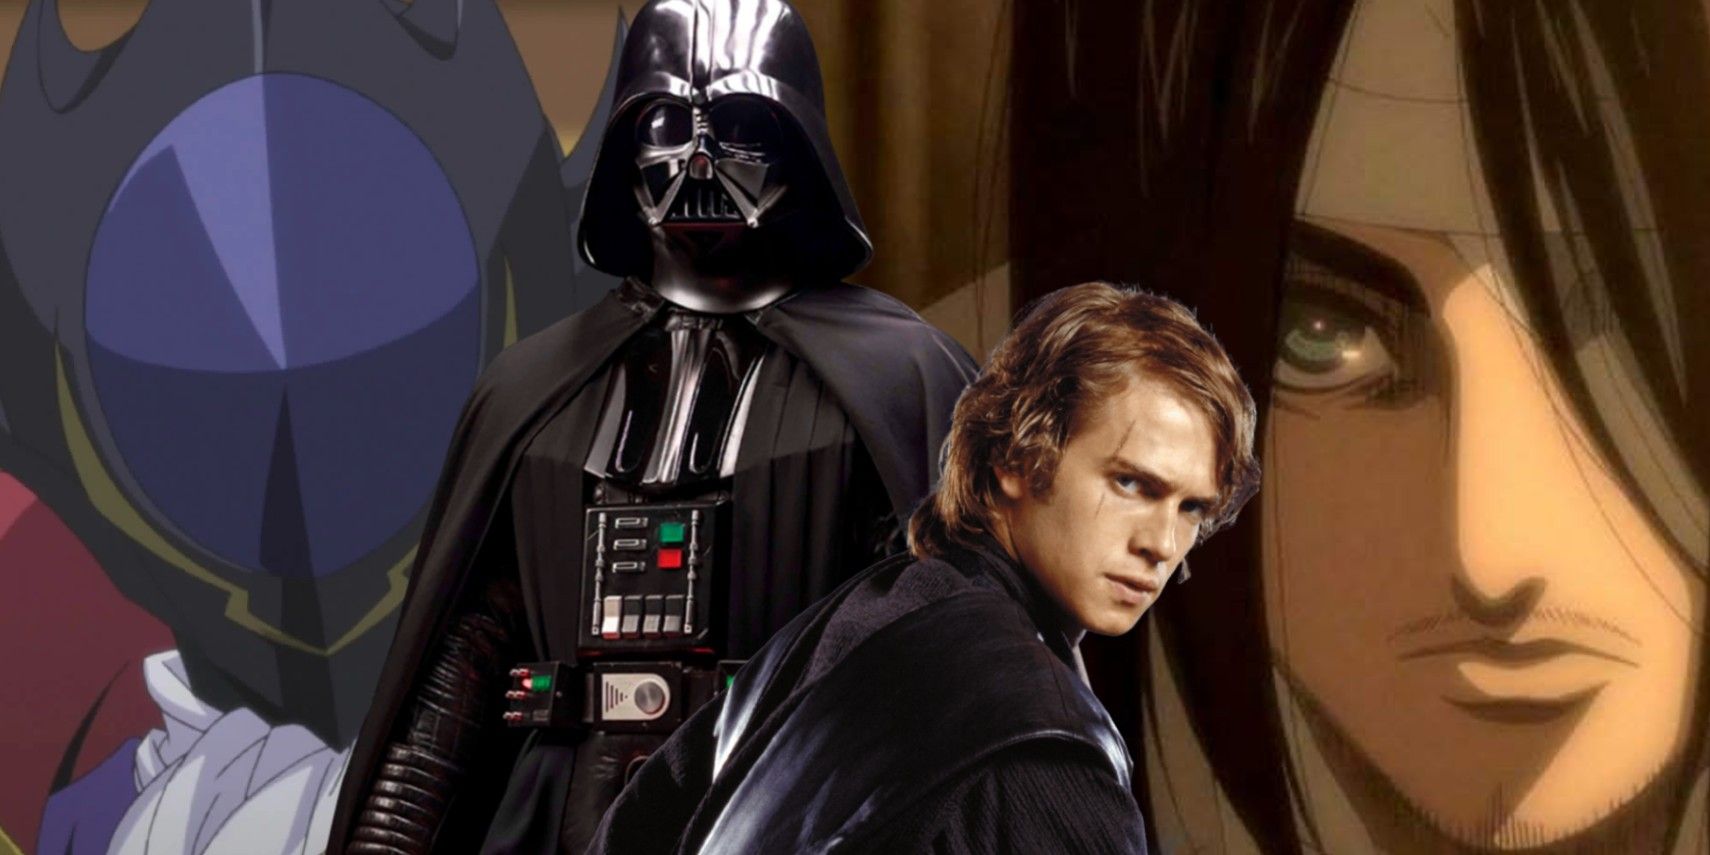 Anakin Skywalker Will Be Back in Animated Form, Not Just Live-Action - IGN